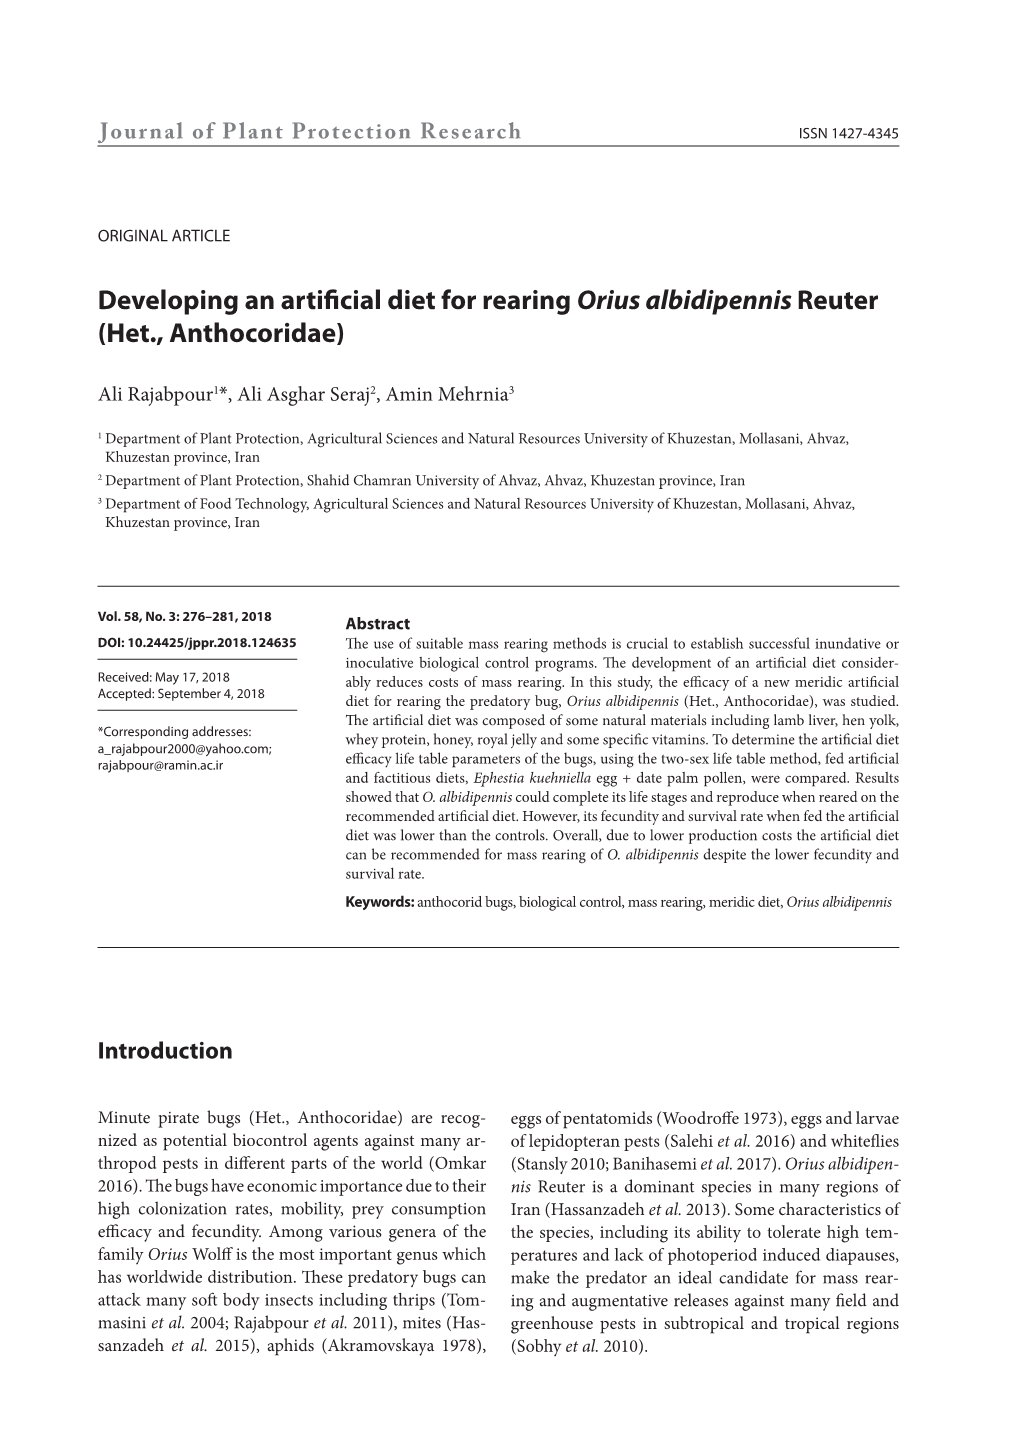 Developing an Artificial Diet for Rearing Orius Albidipennis Reuter (Het., Anthocoridae)